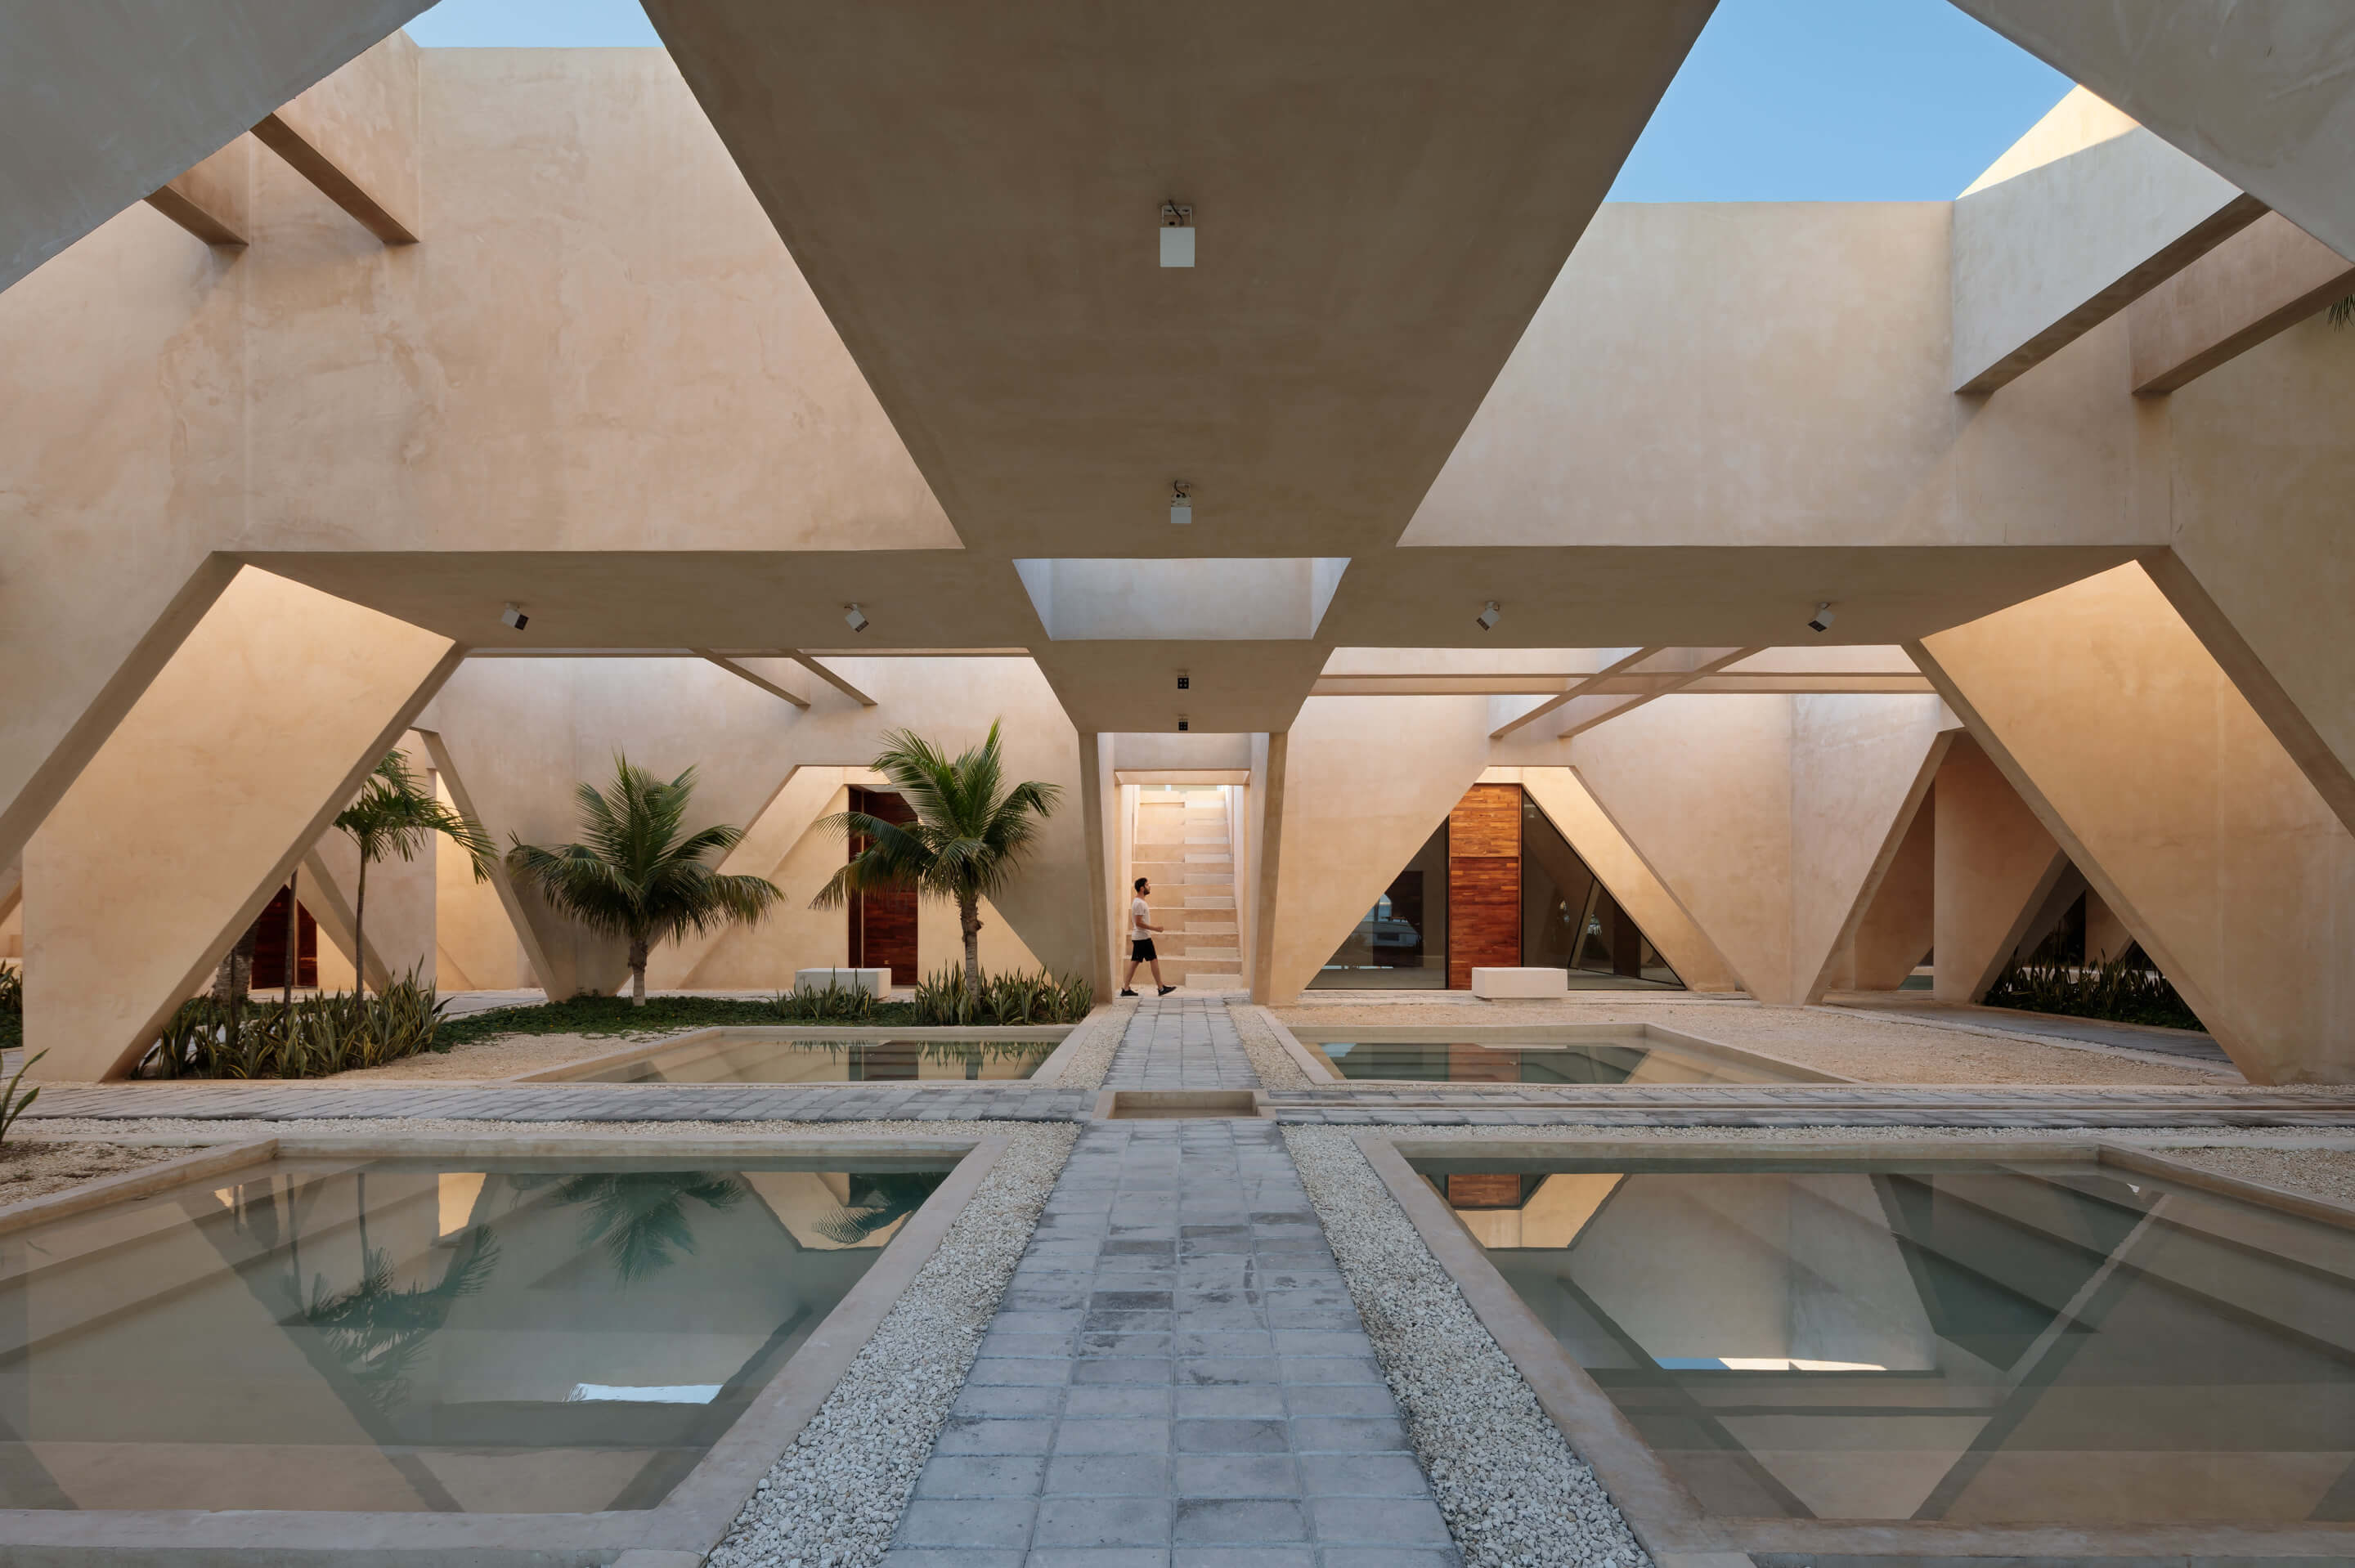 a semi-enclosed courtyard with reflecting pools